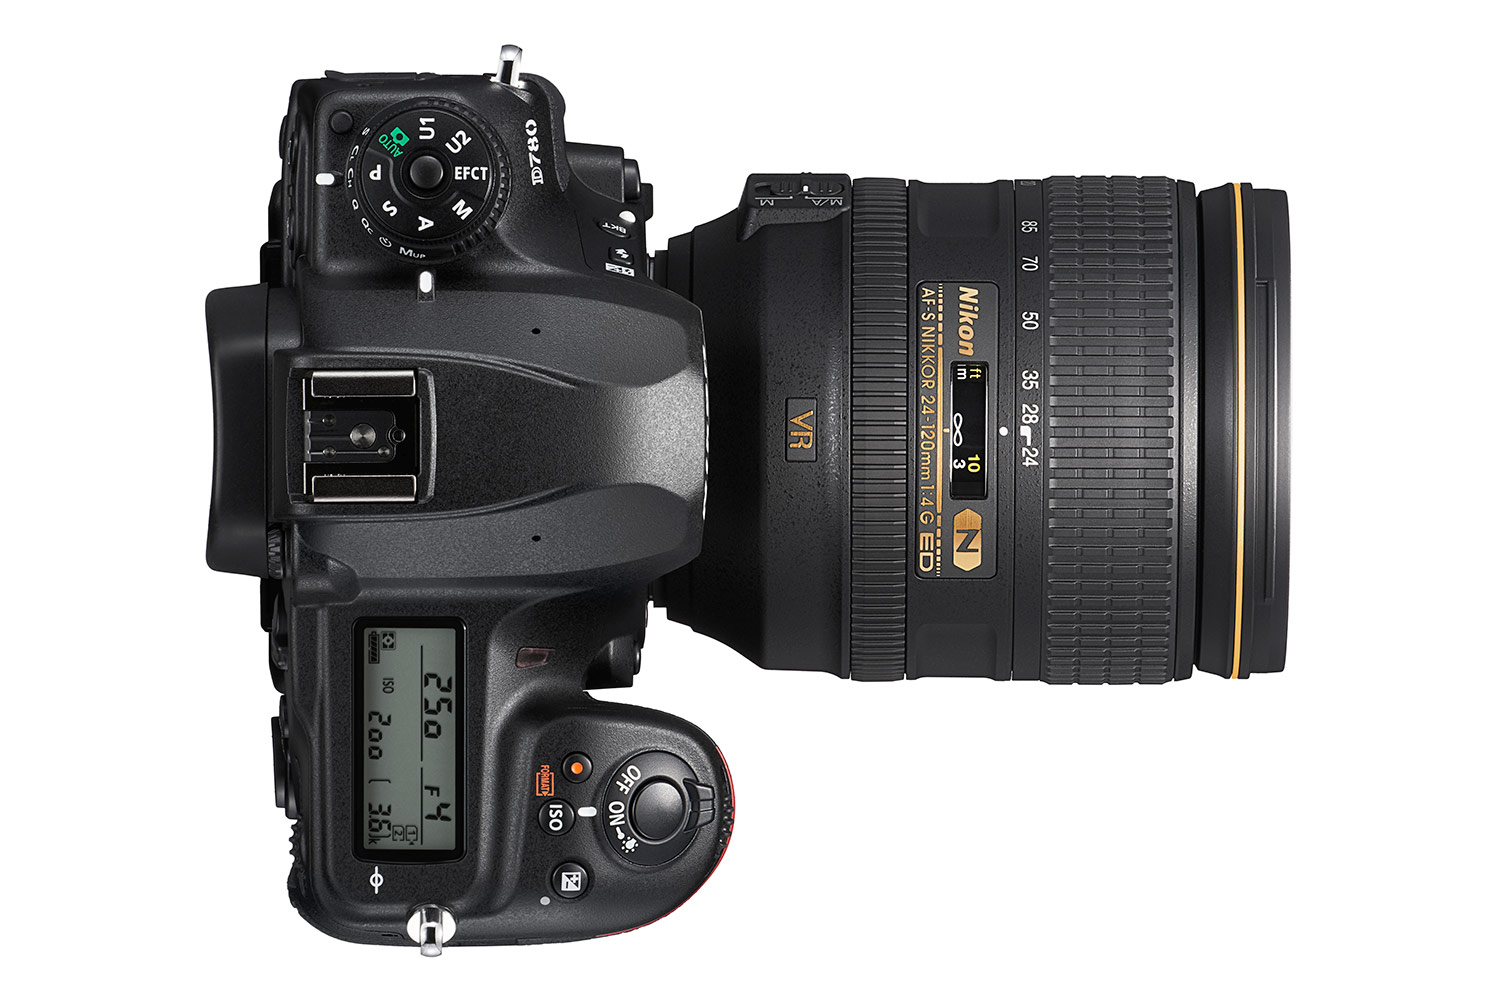 nikon d780 long awaited successor to d750 is here ces 2020 top press image